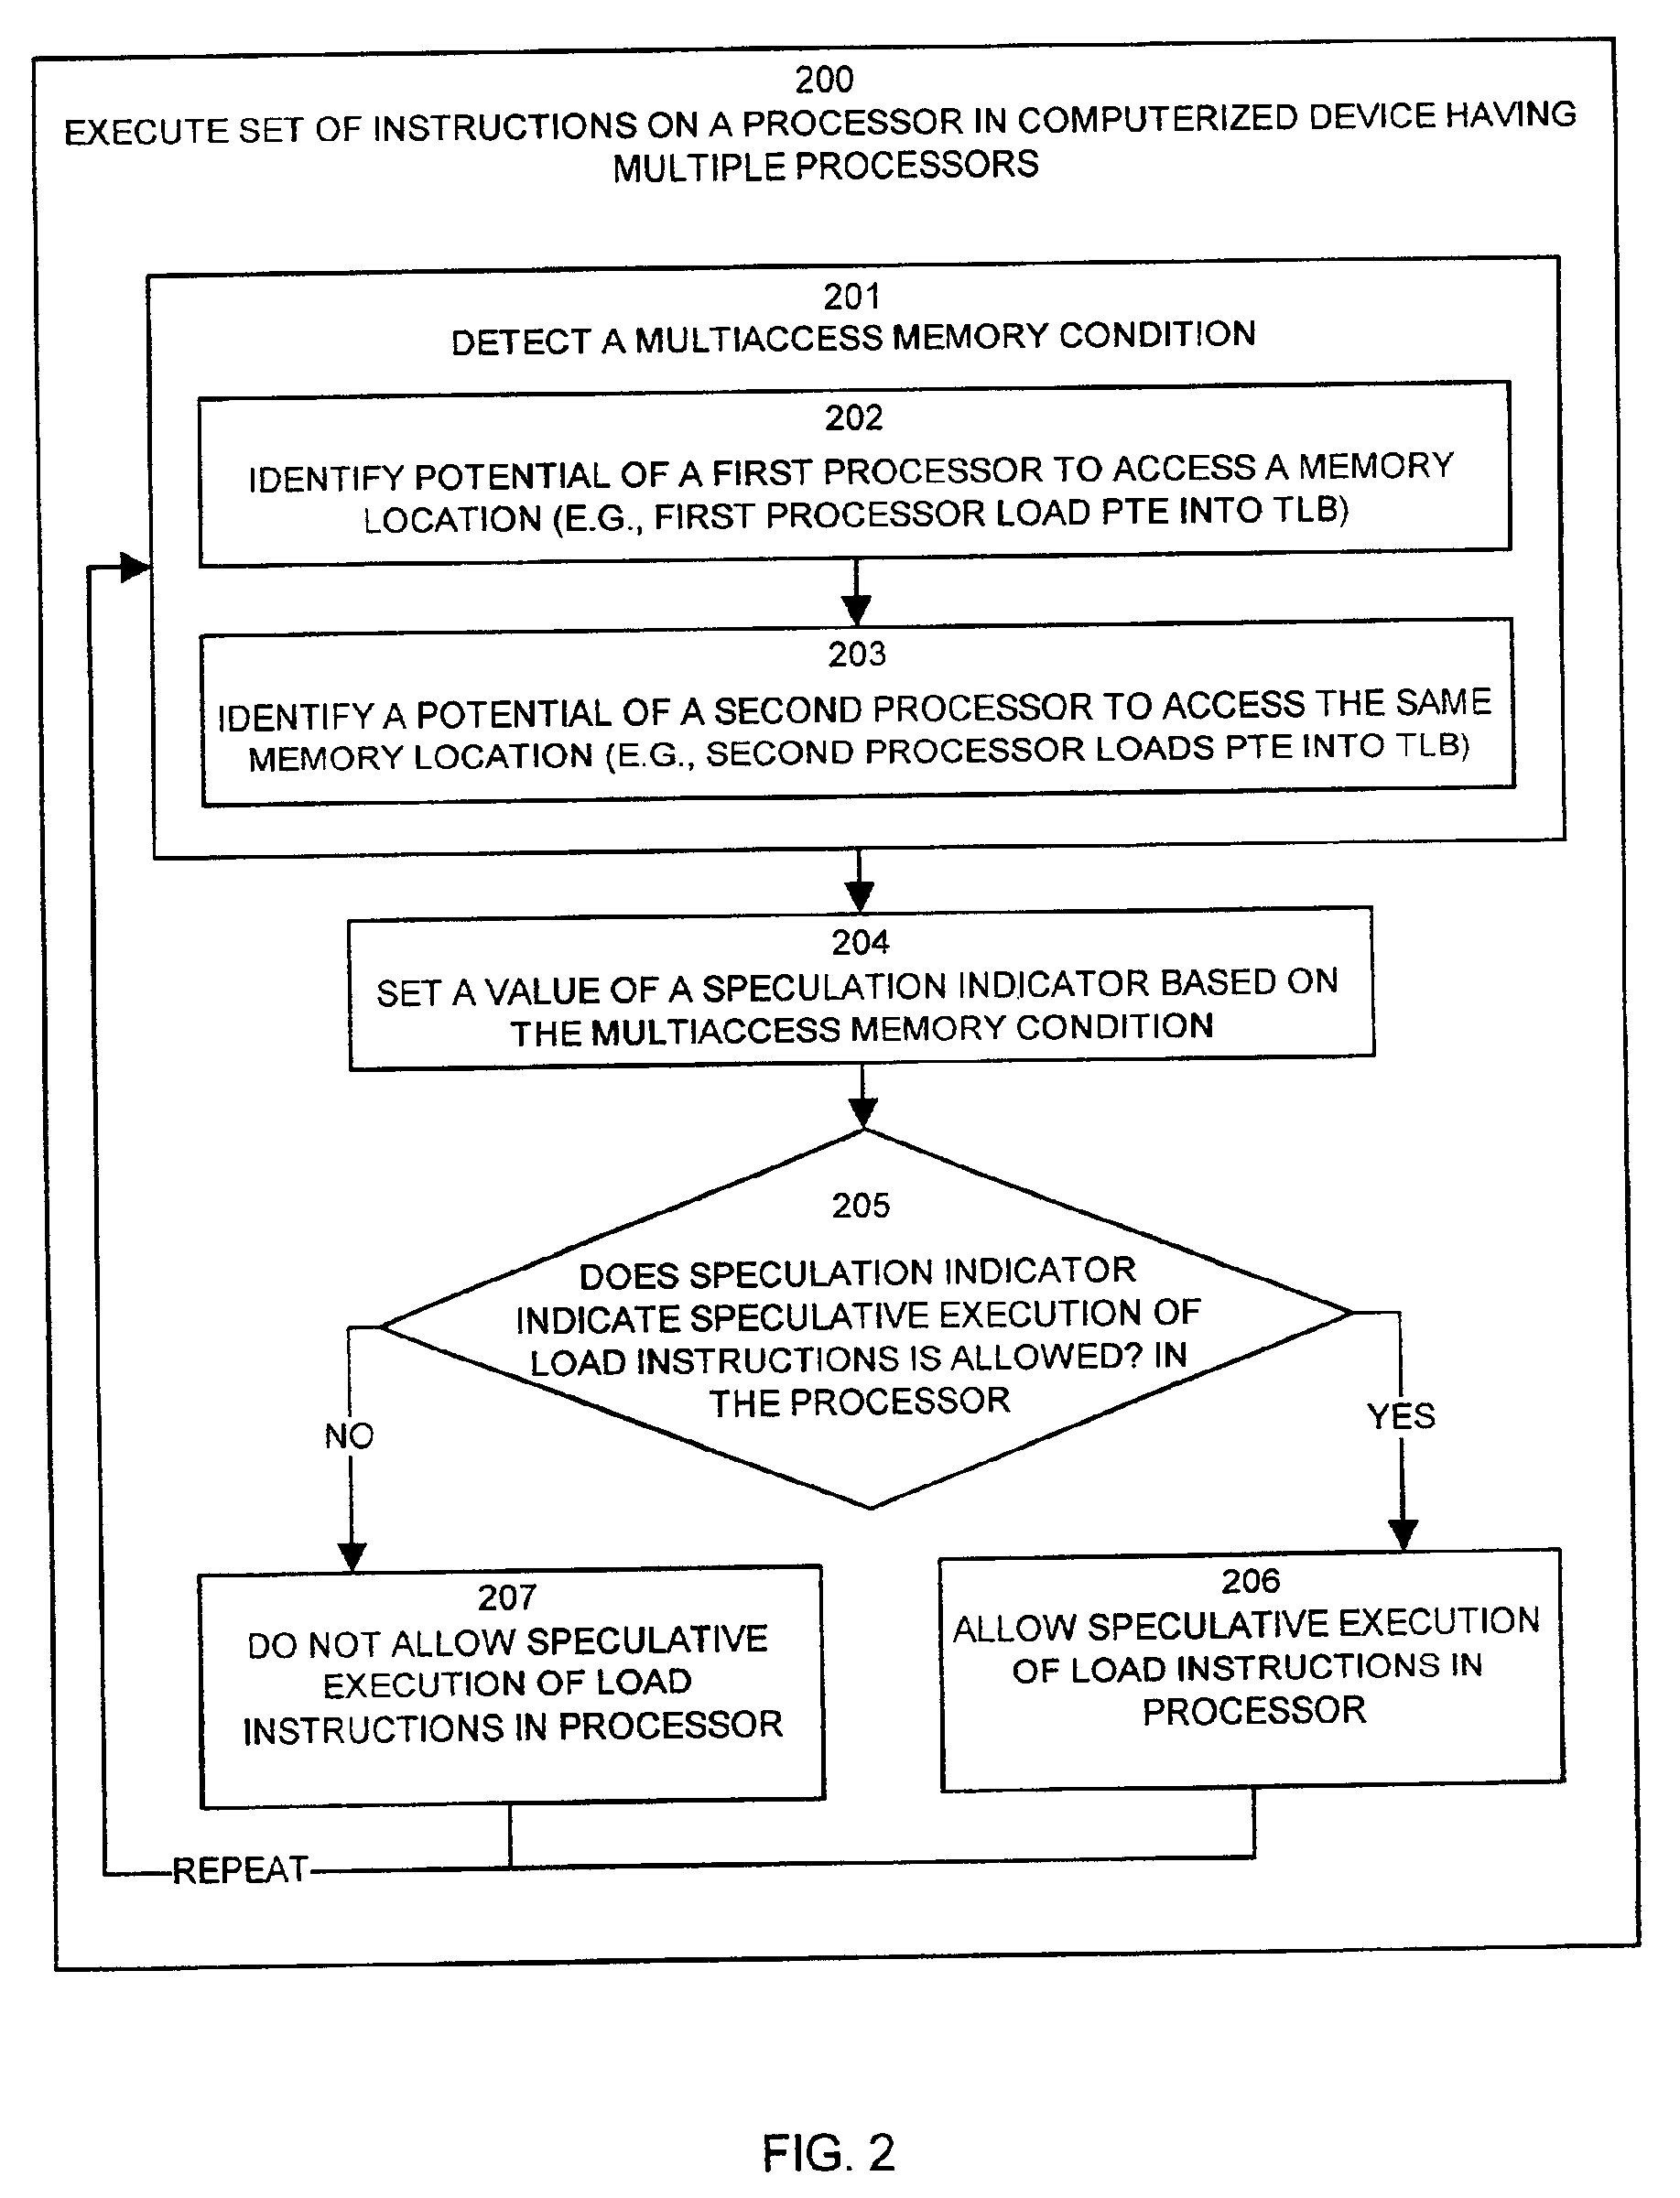 Methods and apparatus for controlling speculative execution of instructions based on a multiaccess memory condition